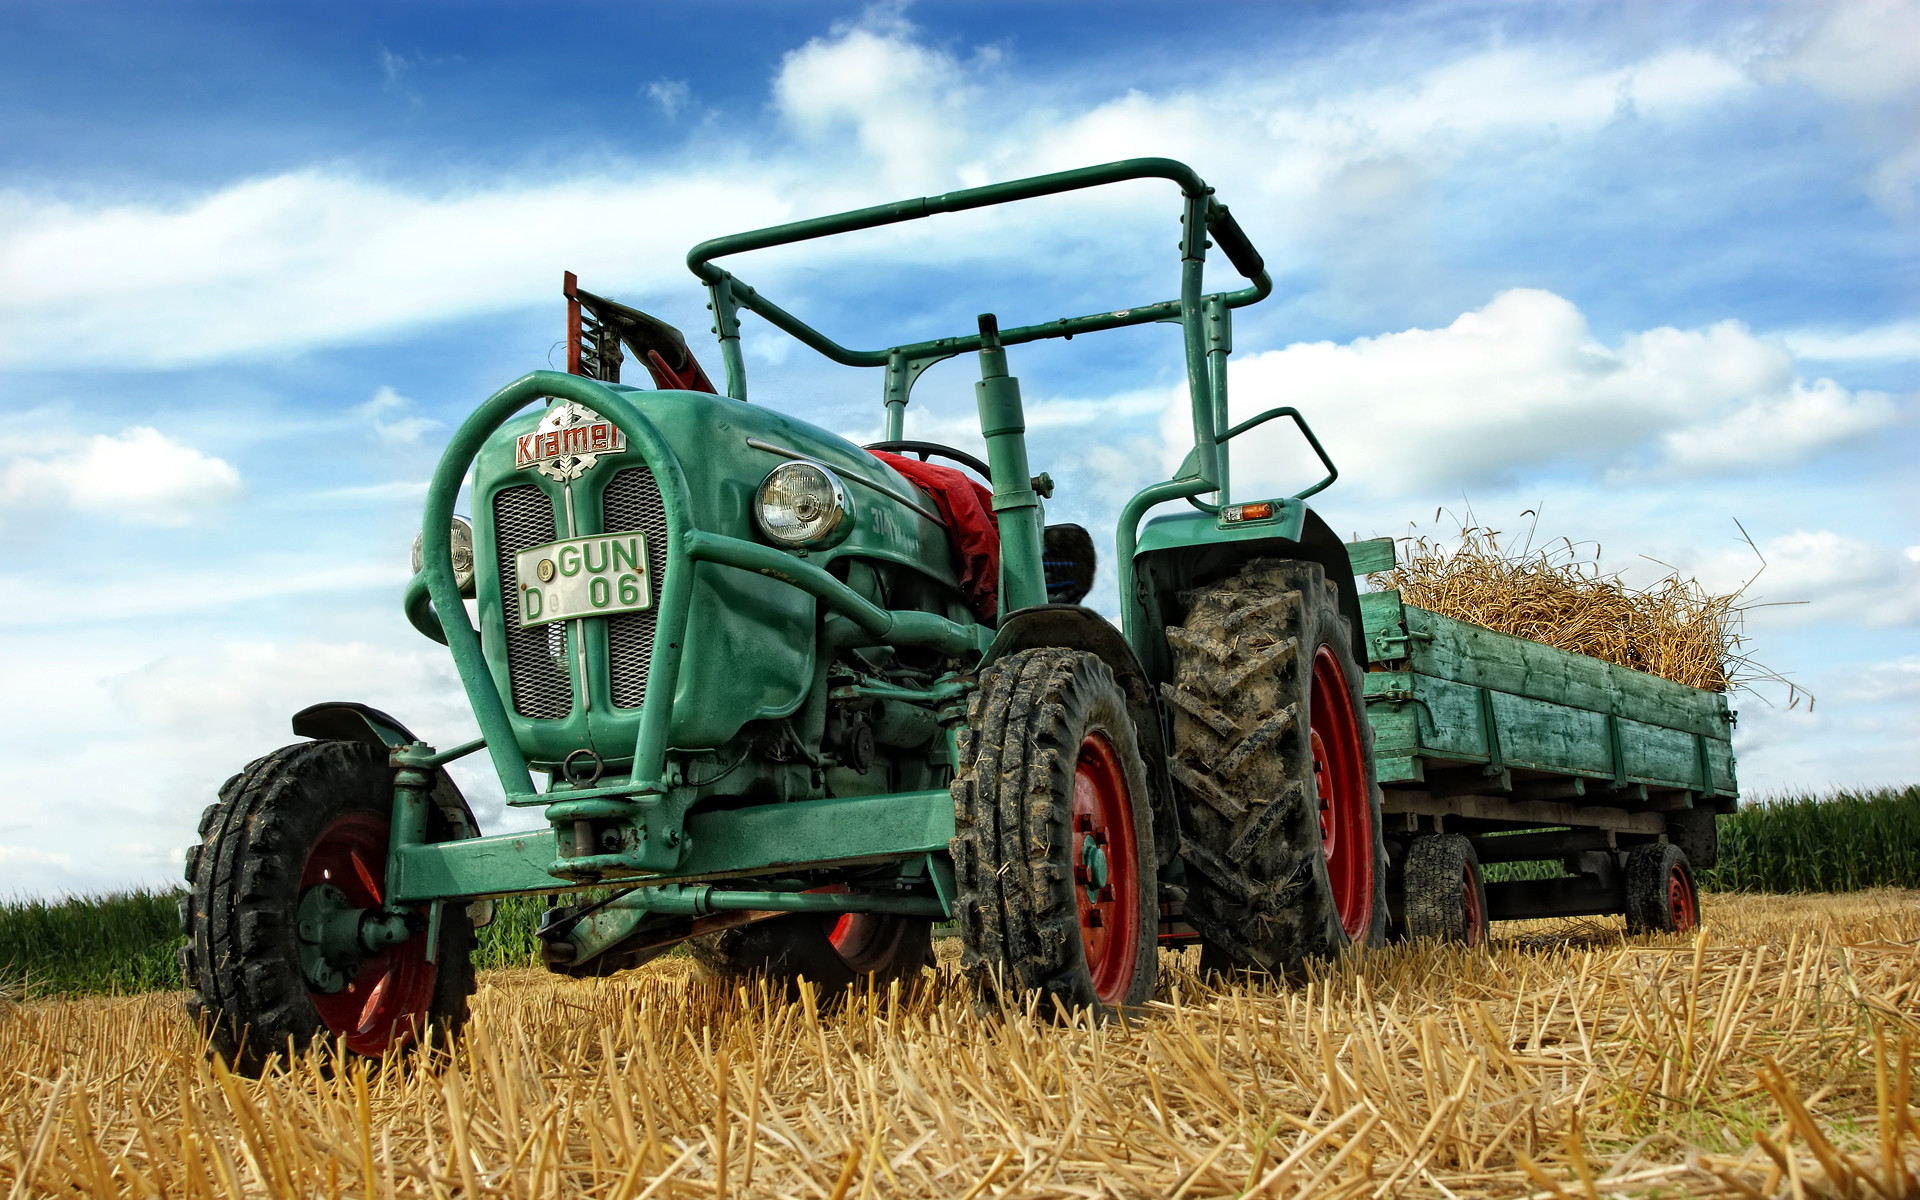 1920x1200 Old Tractor Wallpaper Tractor Images Wallpapers Wallpapers)